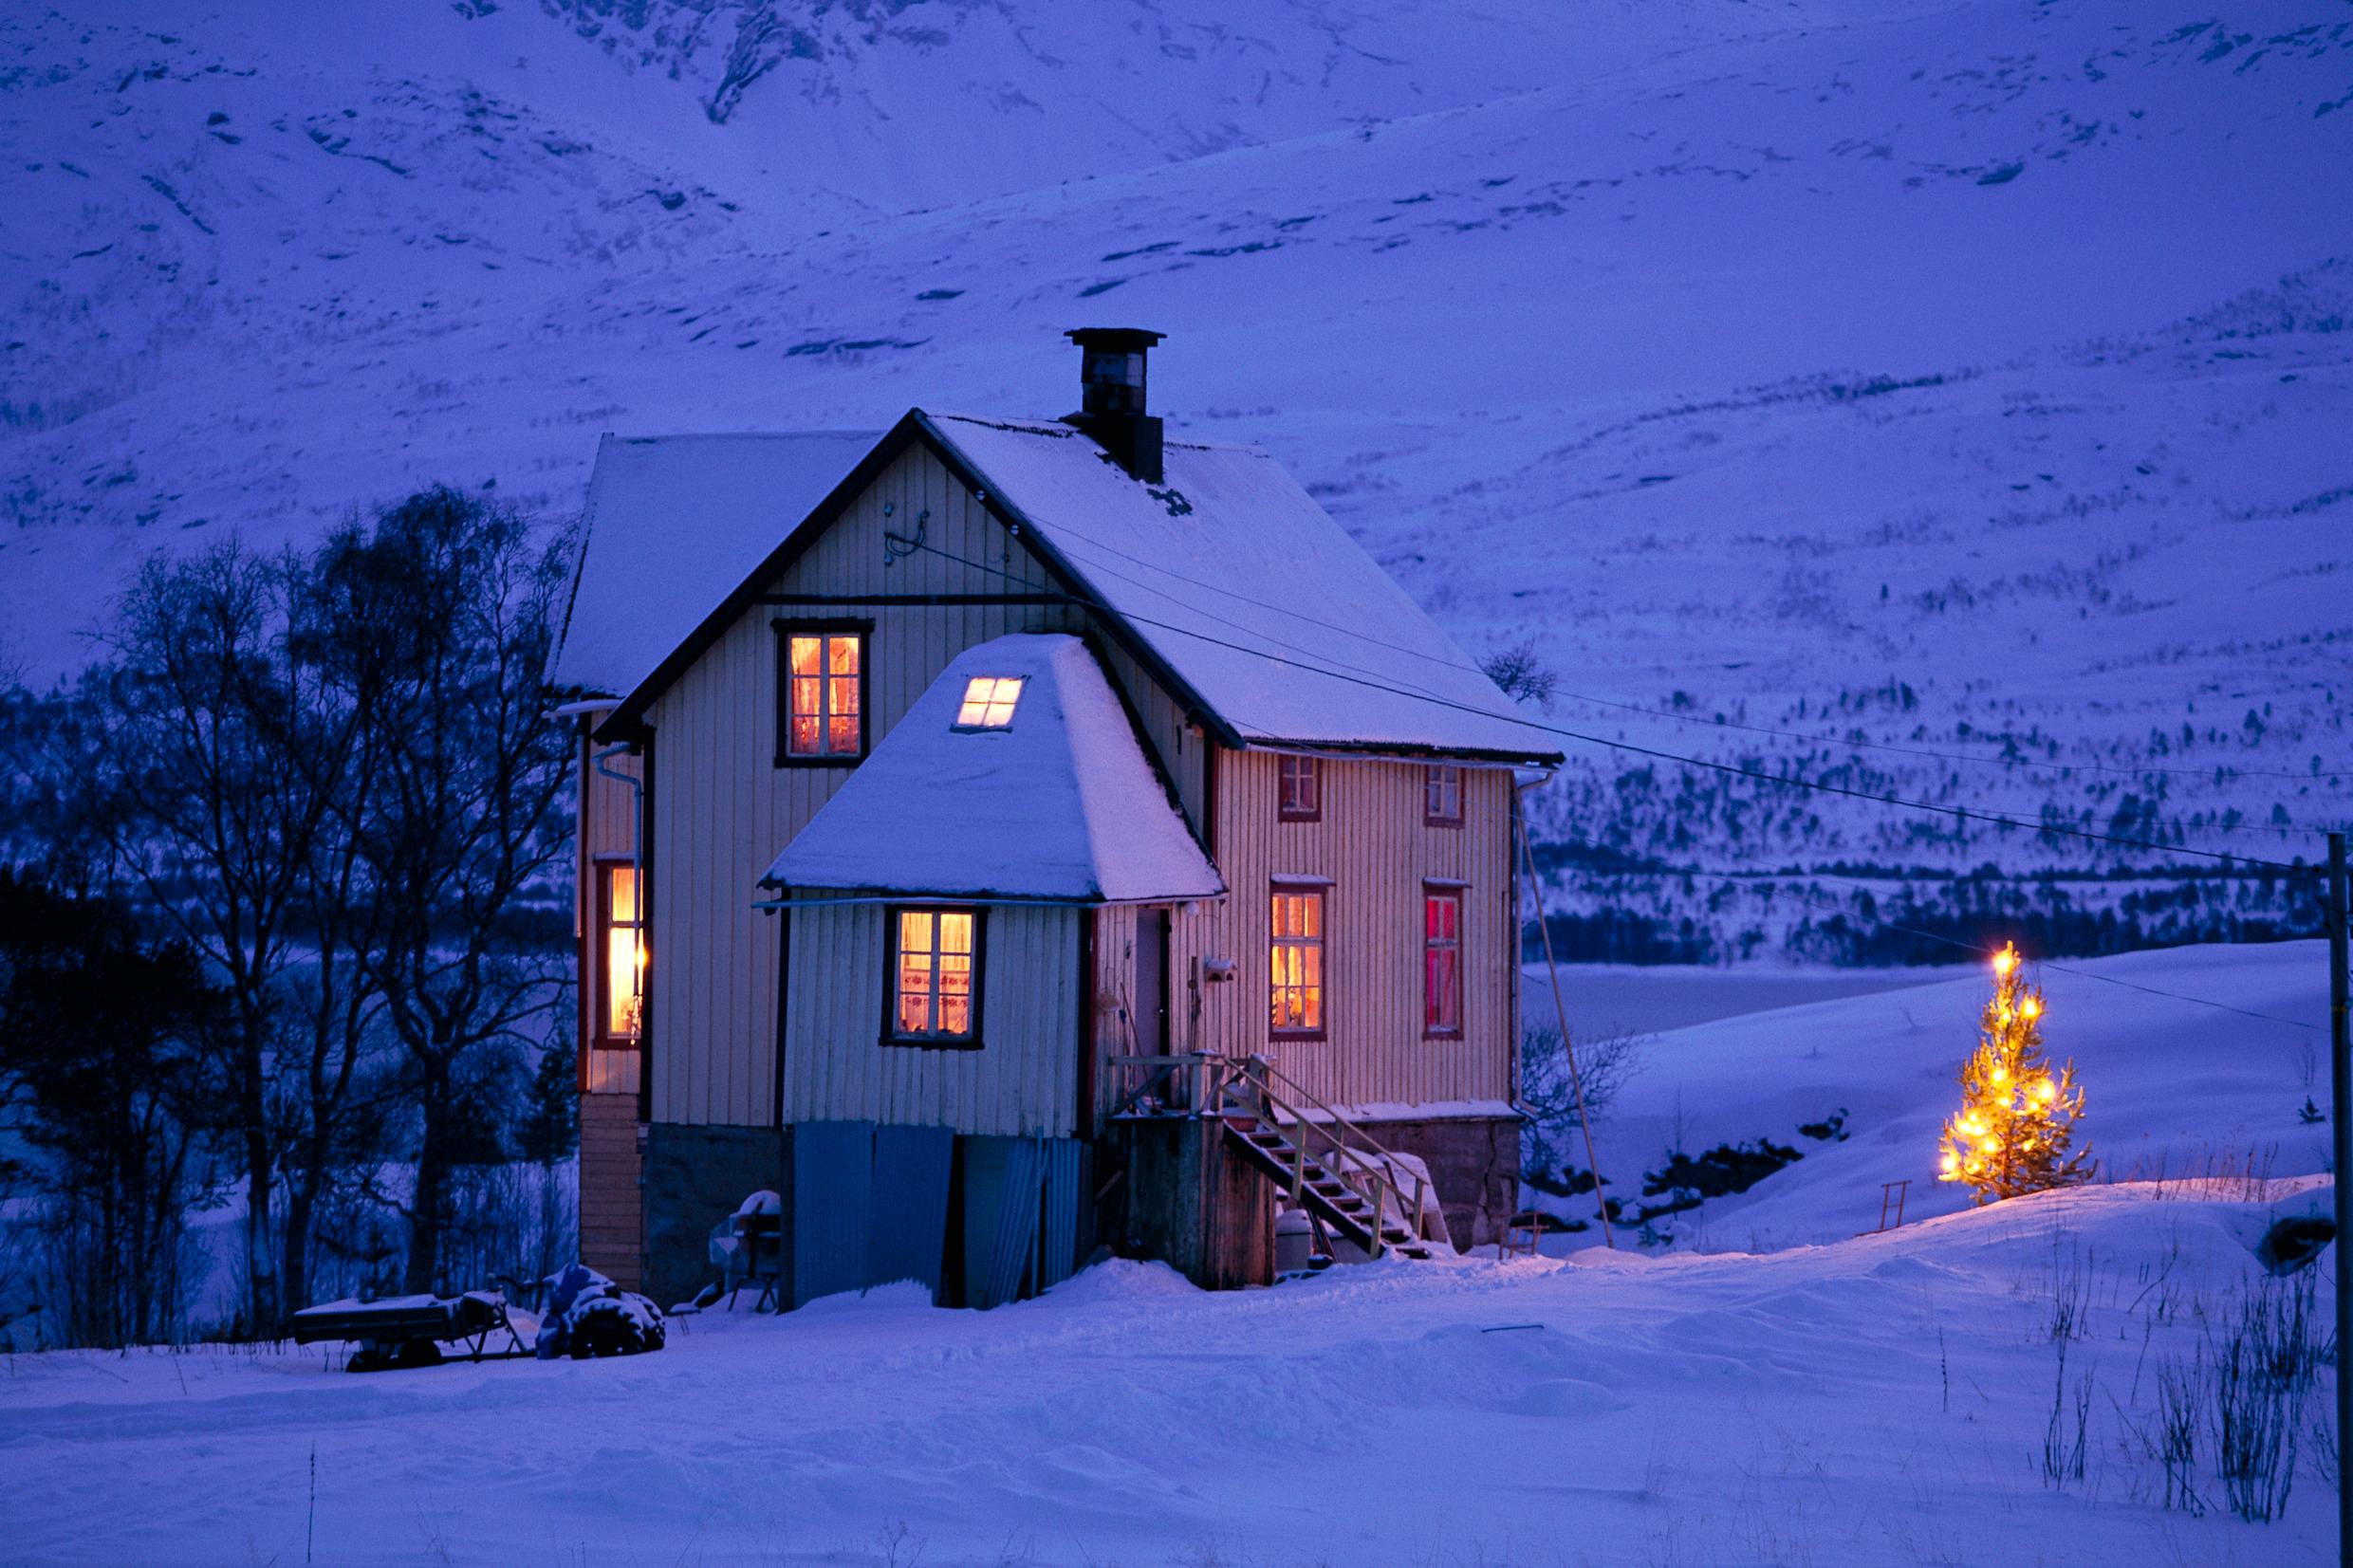 A countryside house warmly lit in the dark winter landscape.